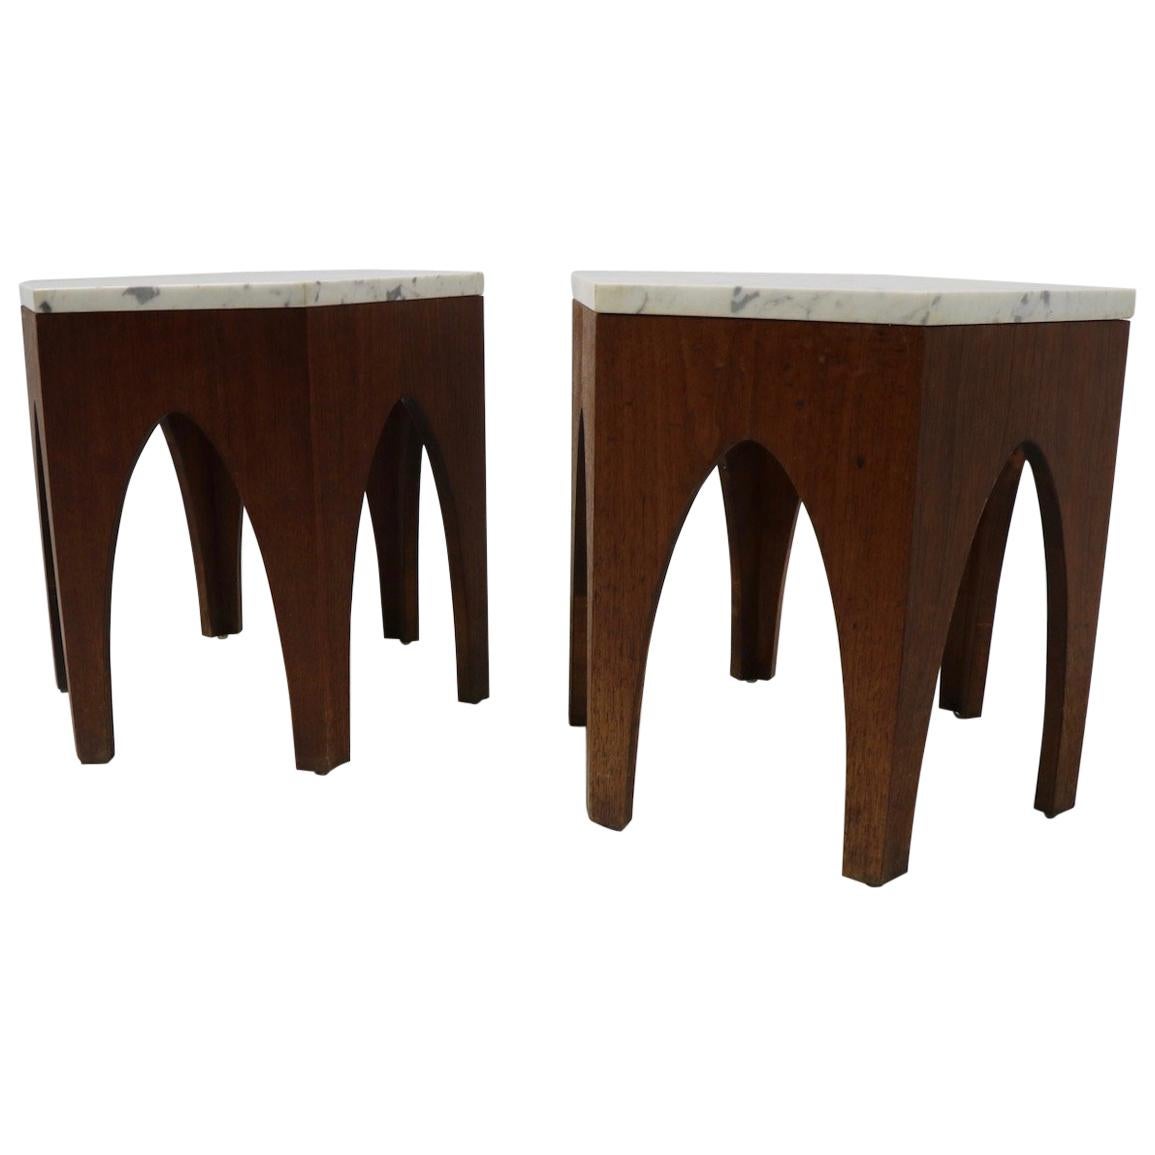 Pair of 6 Sided Probber Style Tables